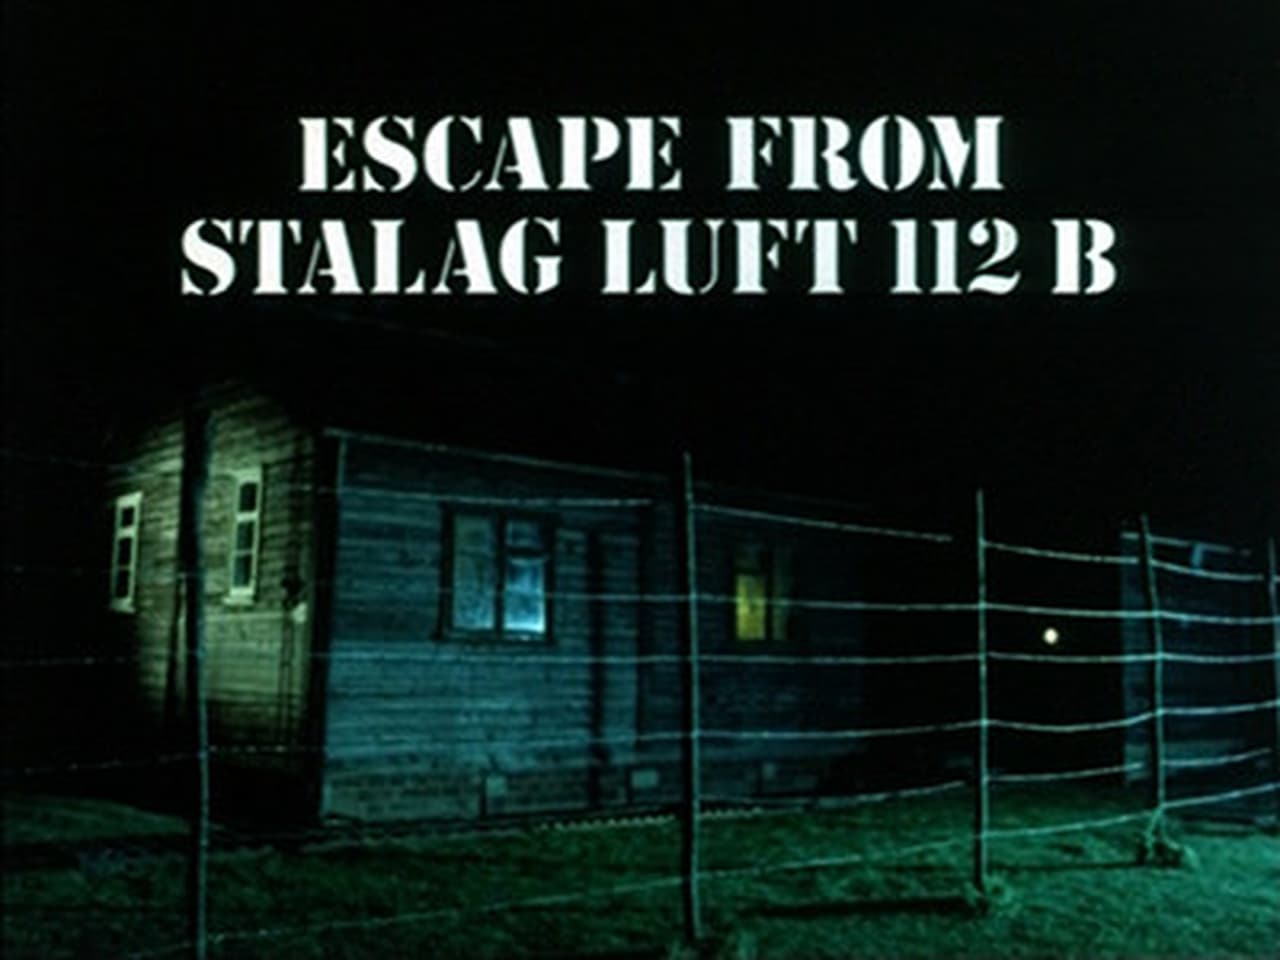 Escape From Stalag Luft 112B